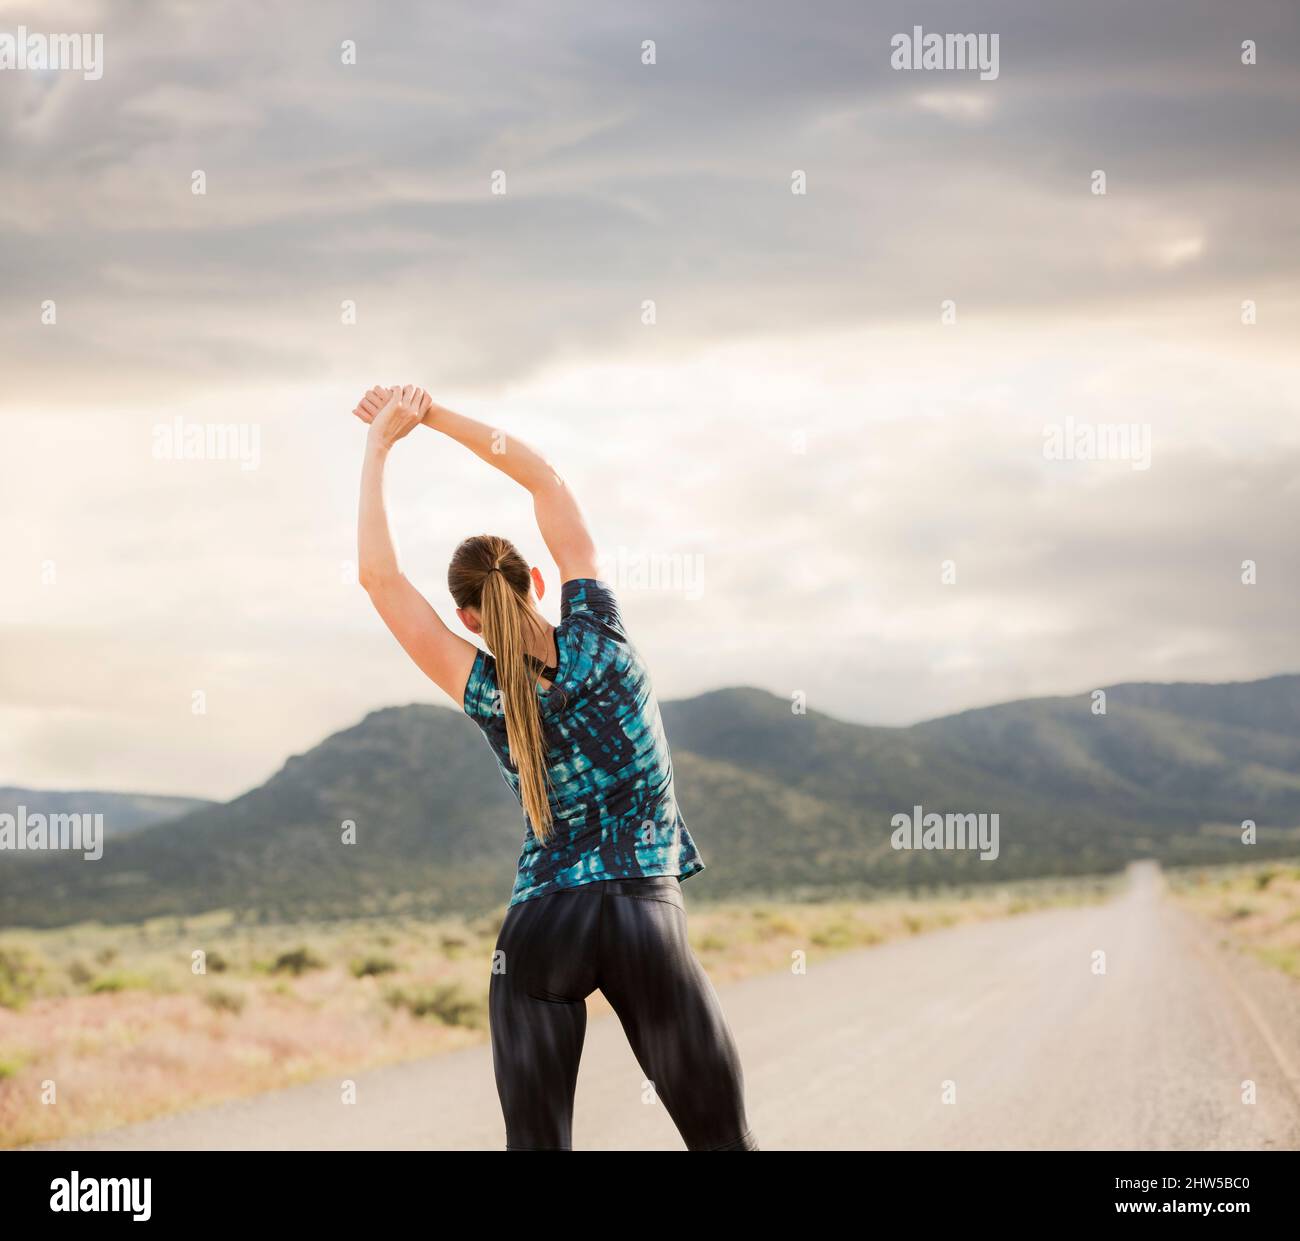 United States, Utah, Cedar Fort, Rear view of woman stretching on road in desert landscape Stock Photo